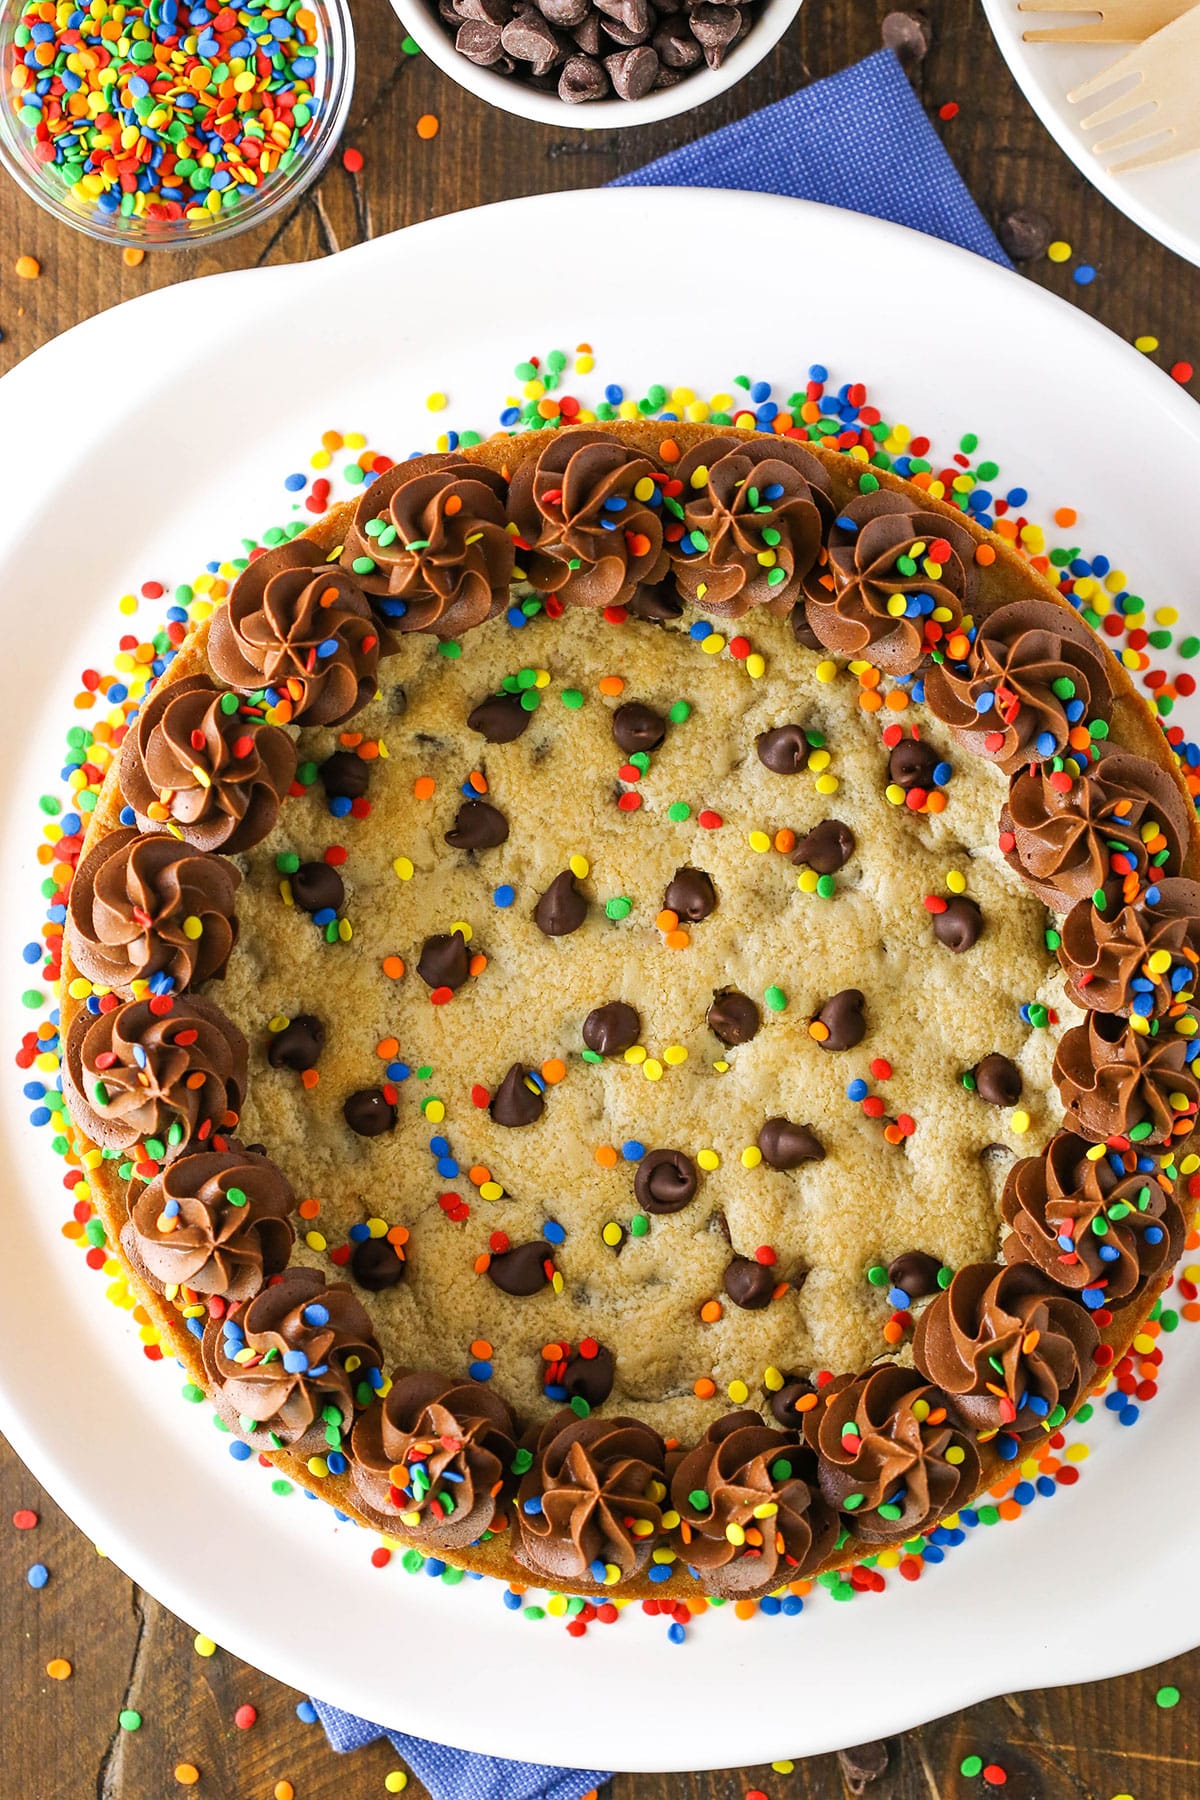 A full Chocolate Chip Cookie Cake with multicolored sprinkles on a white plate